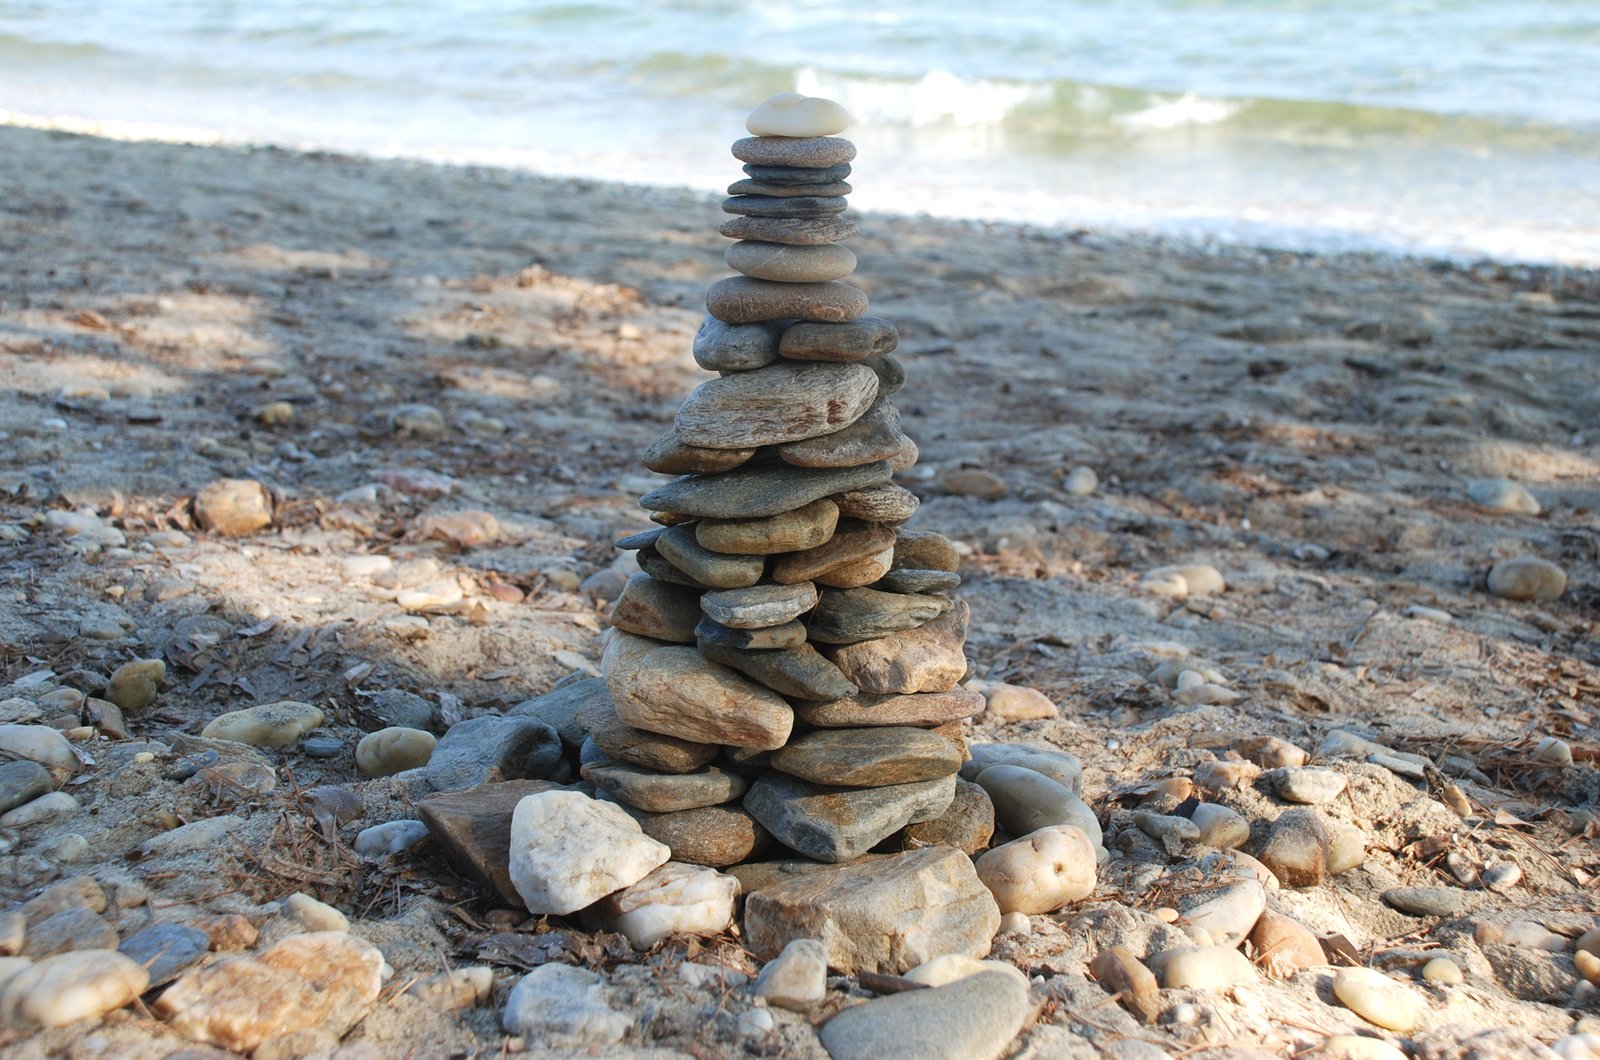 an up close image of rocks stacked on the beach